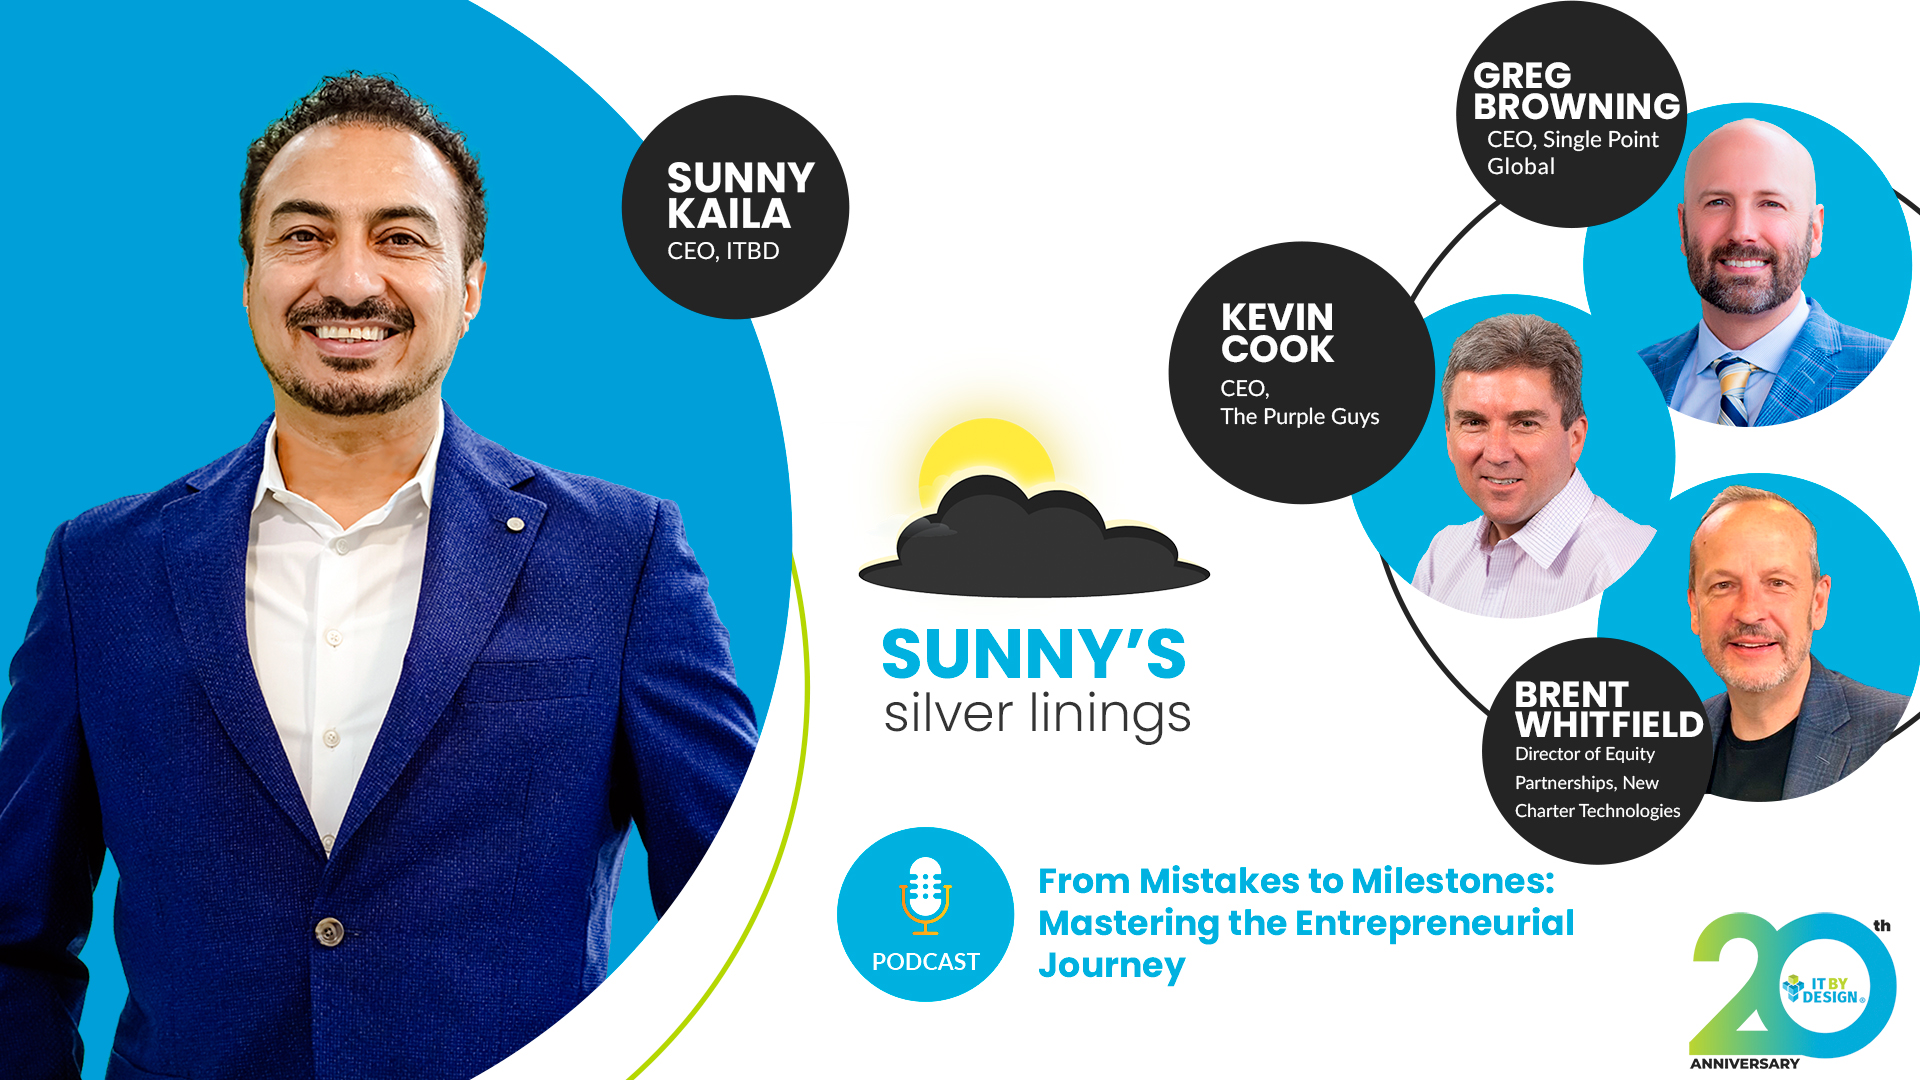 From Mistakes to Milestones: Mastering the Entrepreneurial Journey